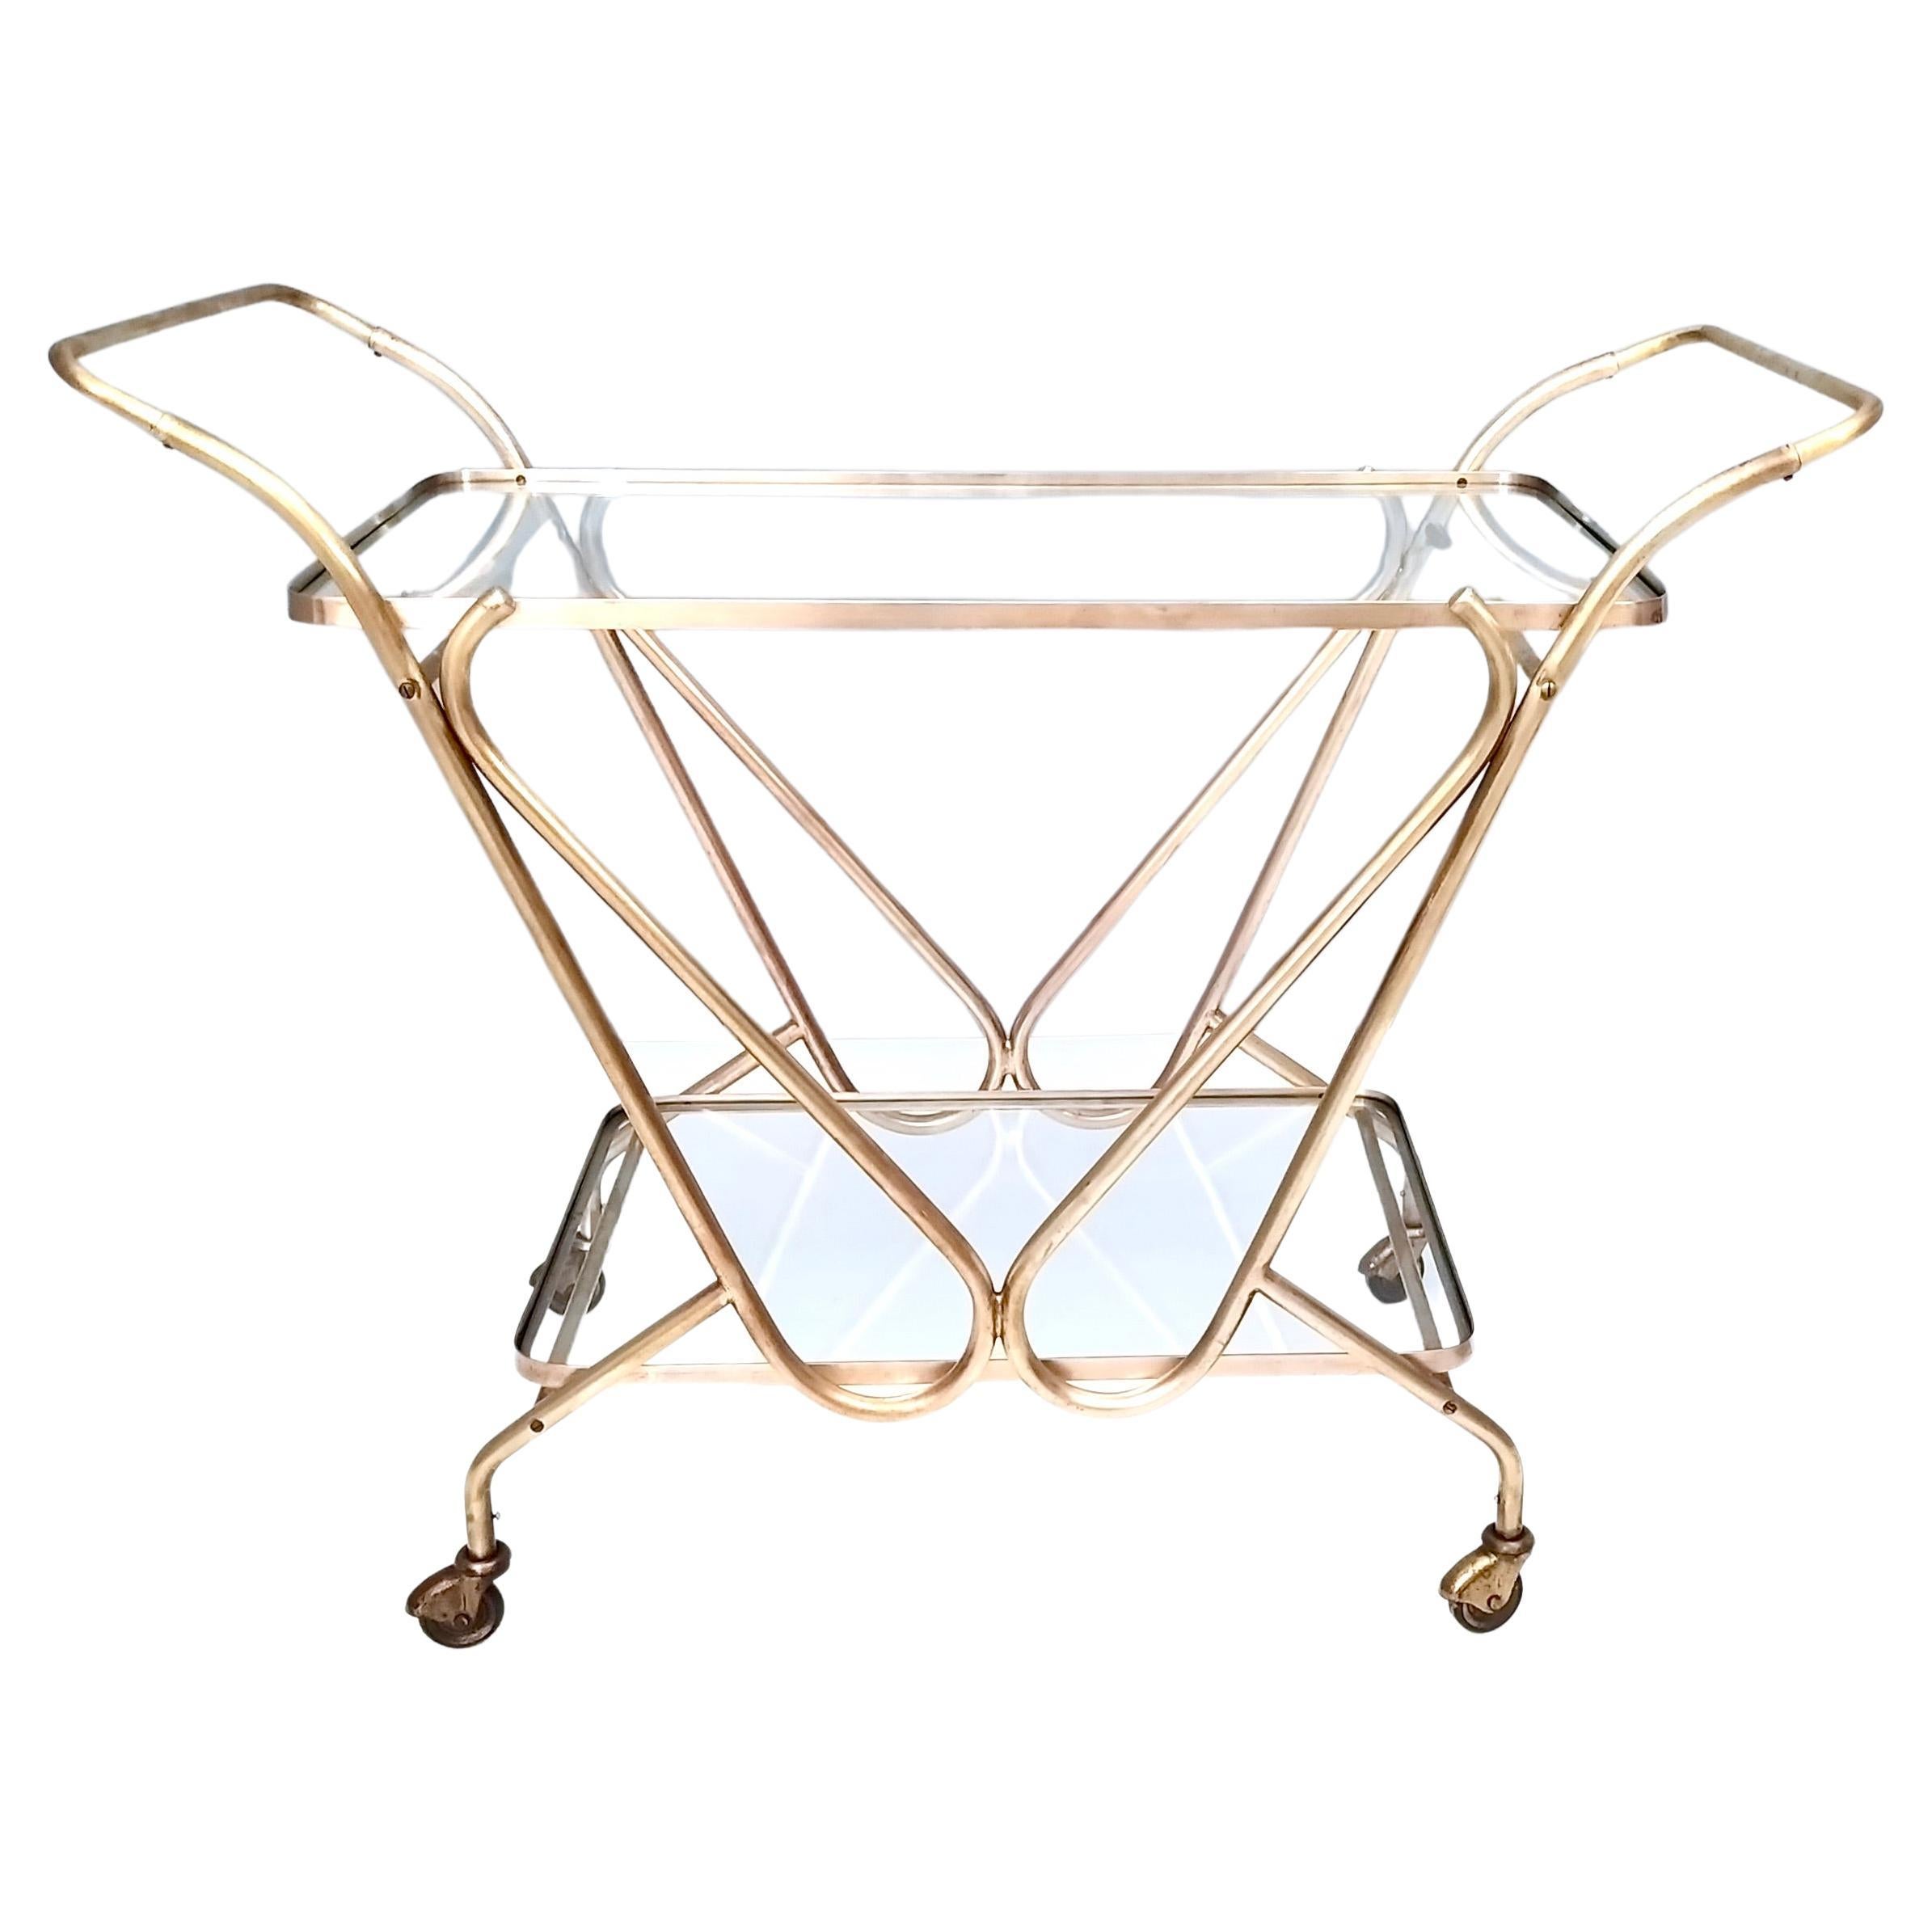 Midcentury Brass Serving Cart with Glass Shelves, Italy